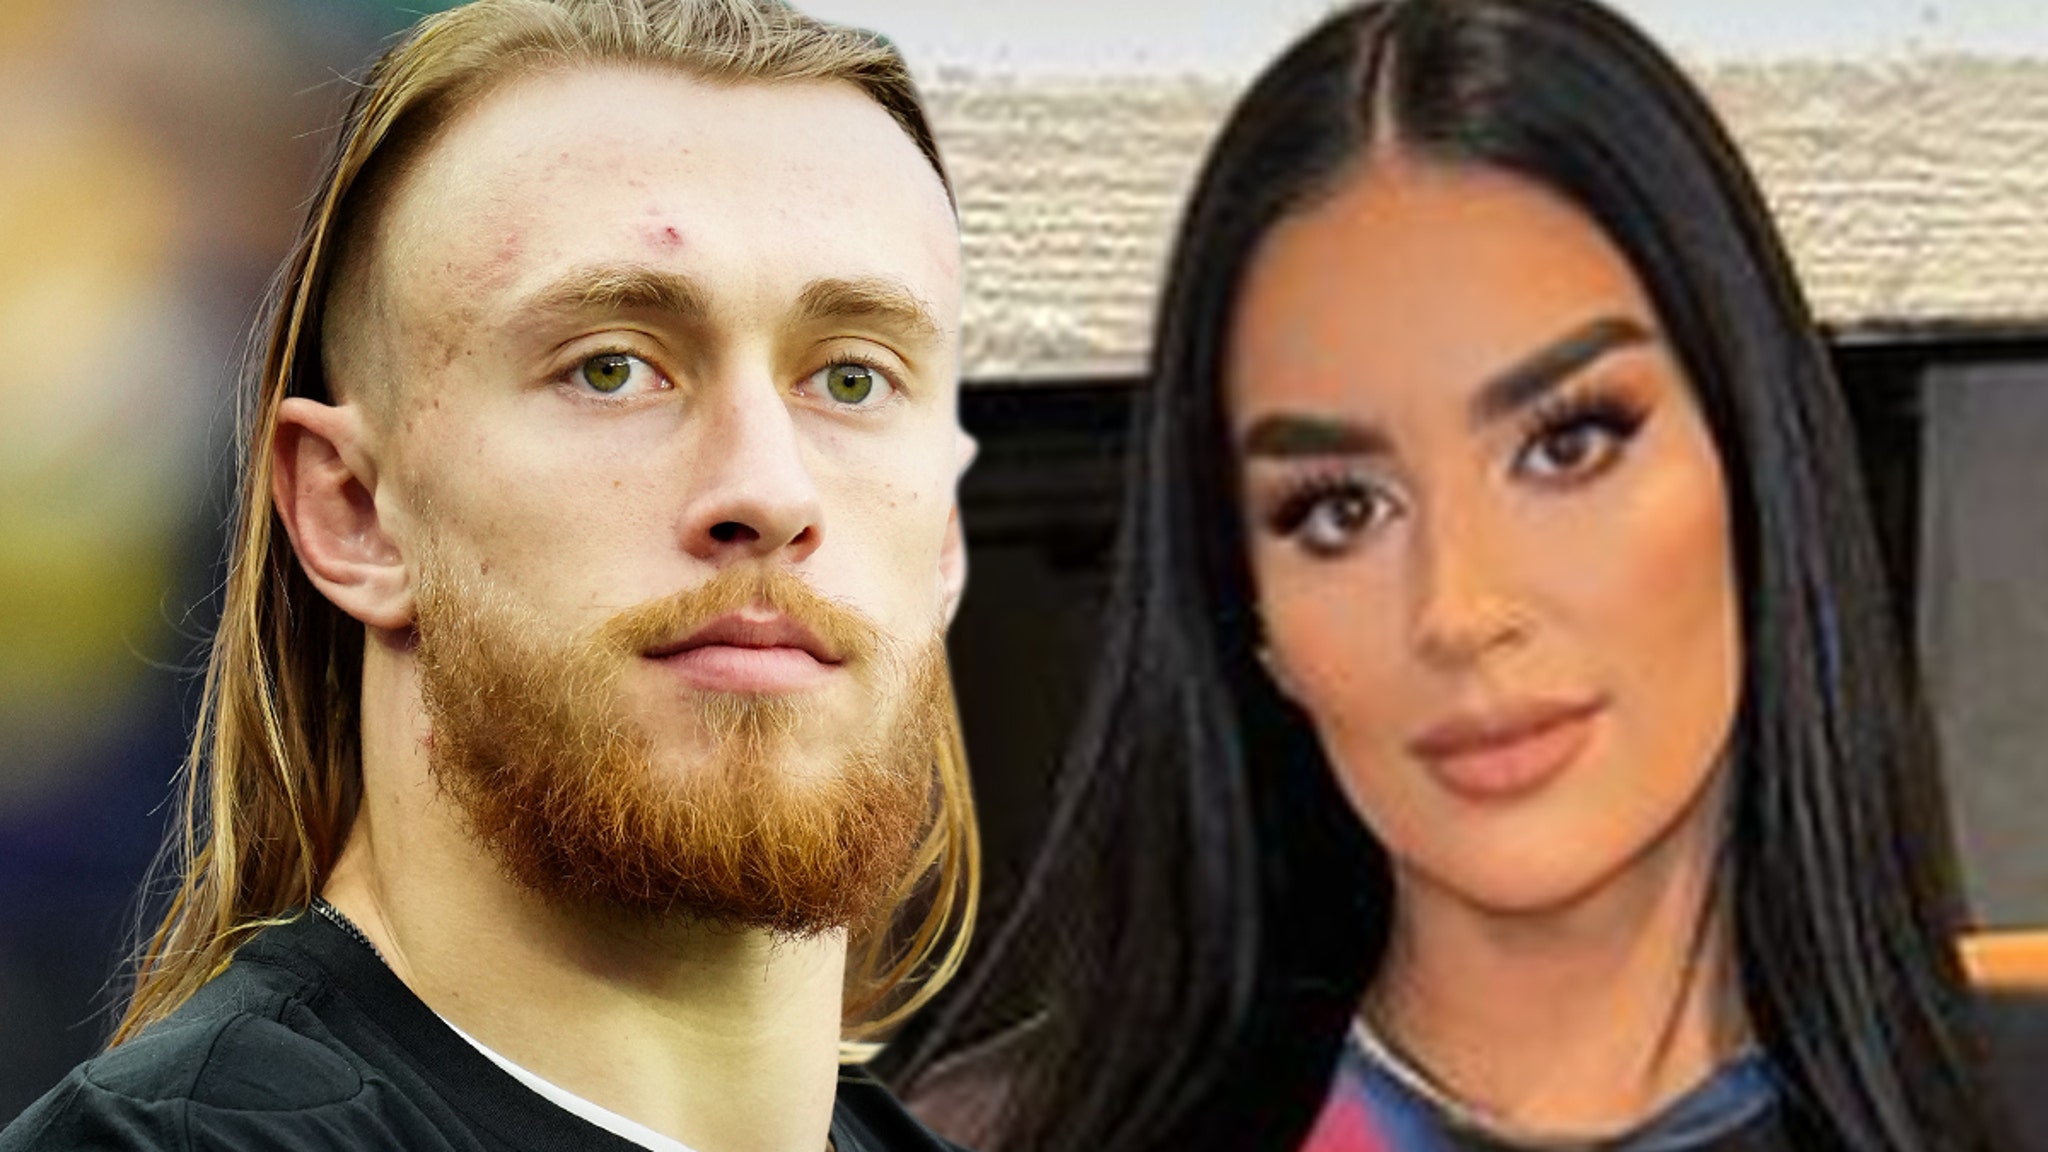 George Kittle’s Wife Reveals She Suffered Miscarriage, ‘Felt My Soul Leave My Body’